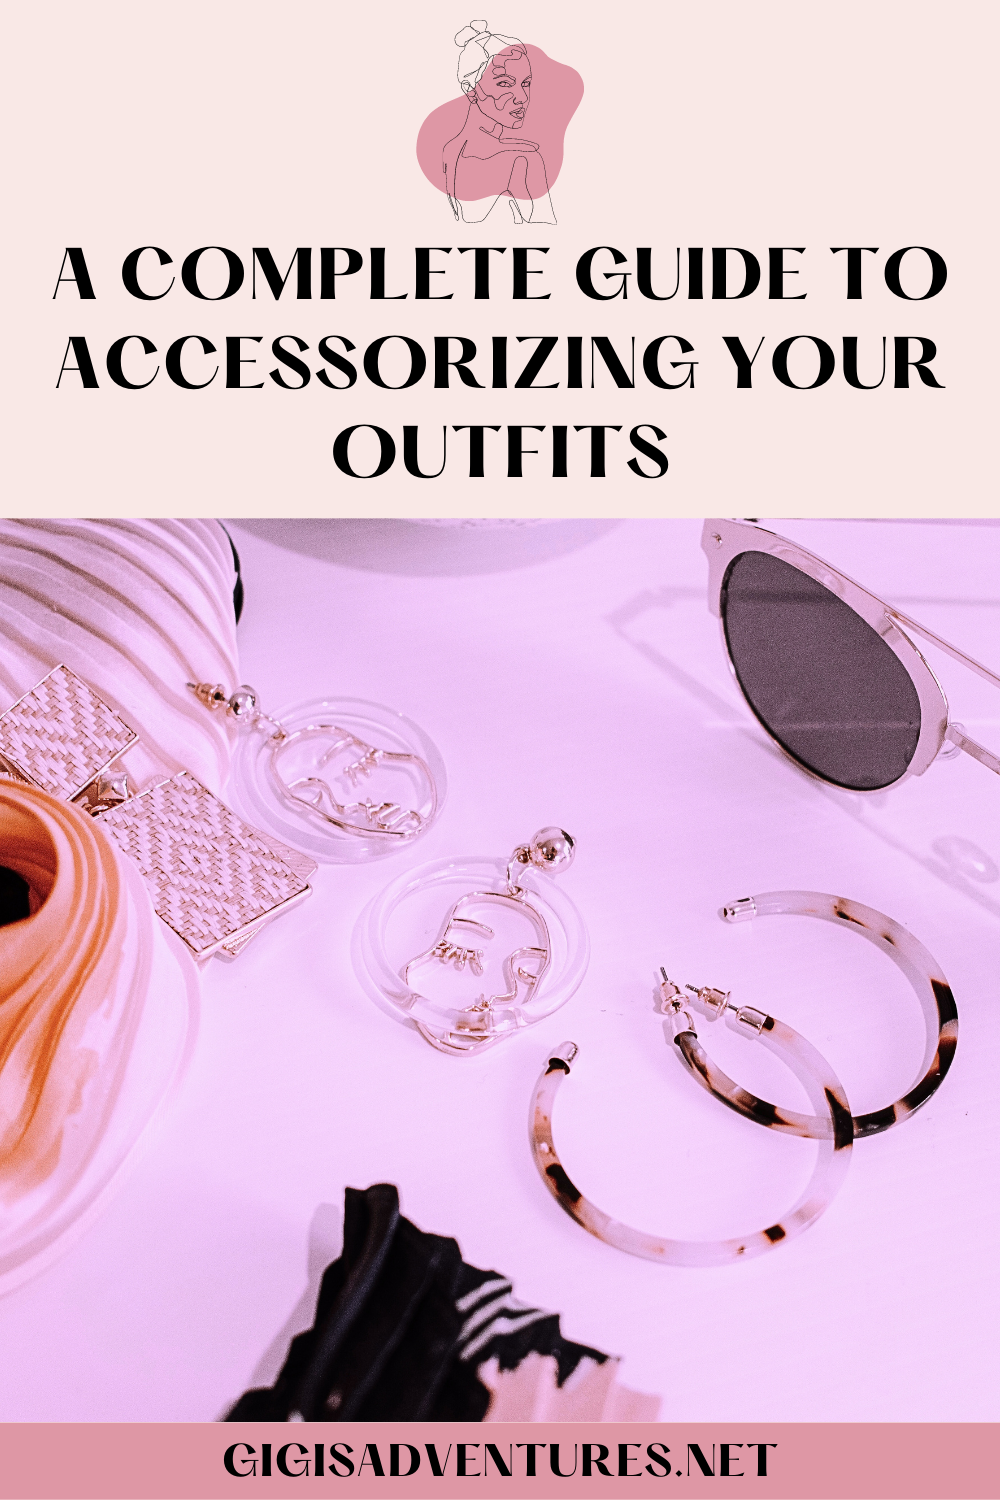 A General Yet Complete Guide to Accessorizing Your Outfits | How To Accessorize